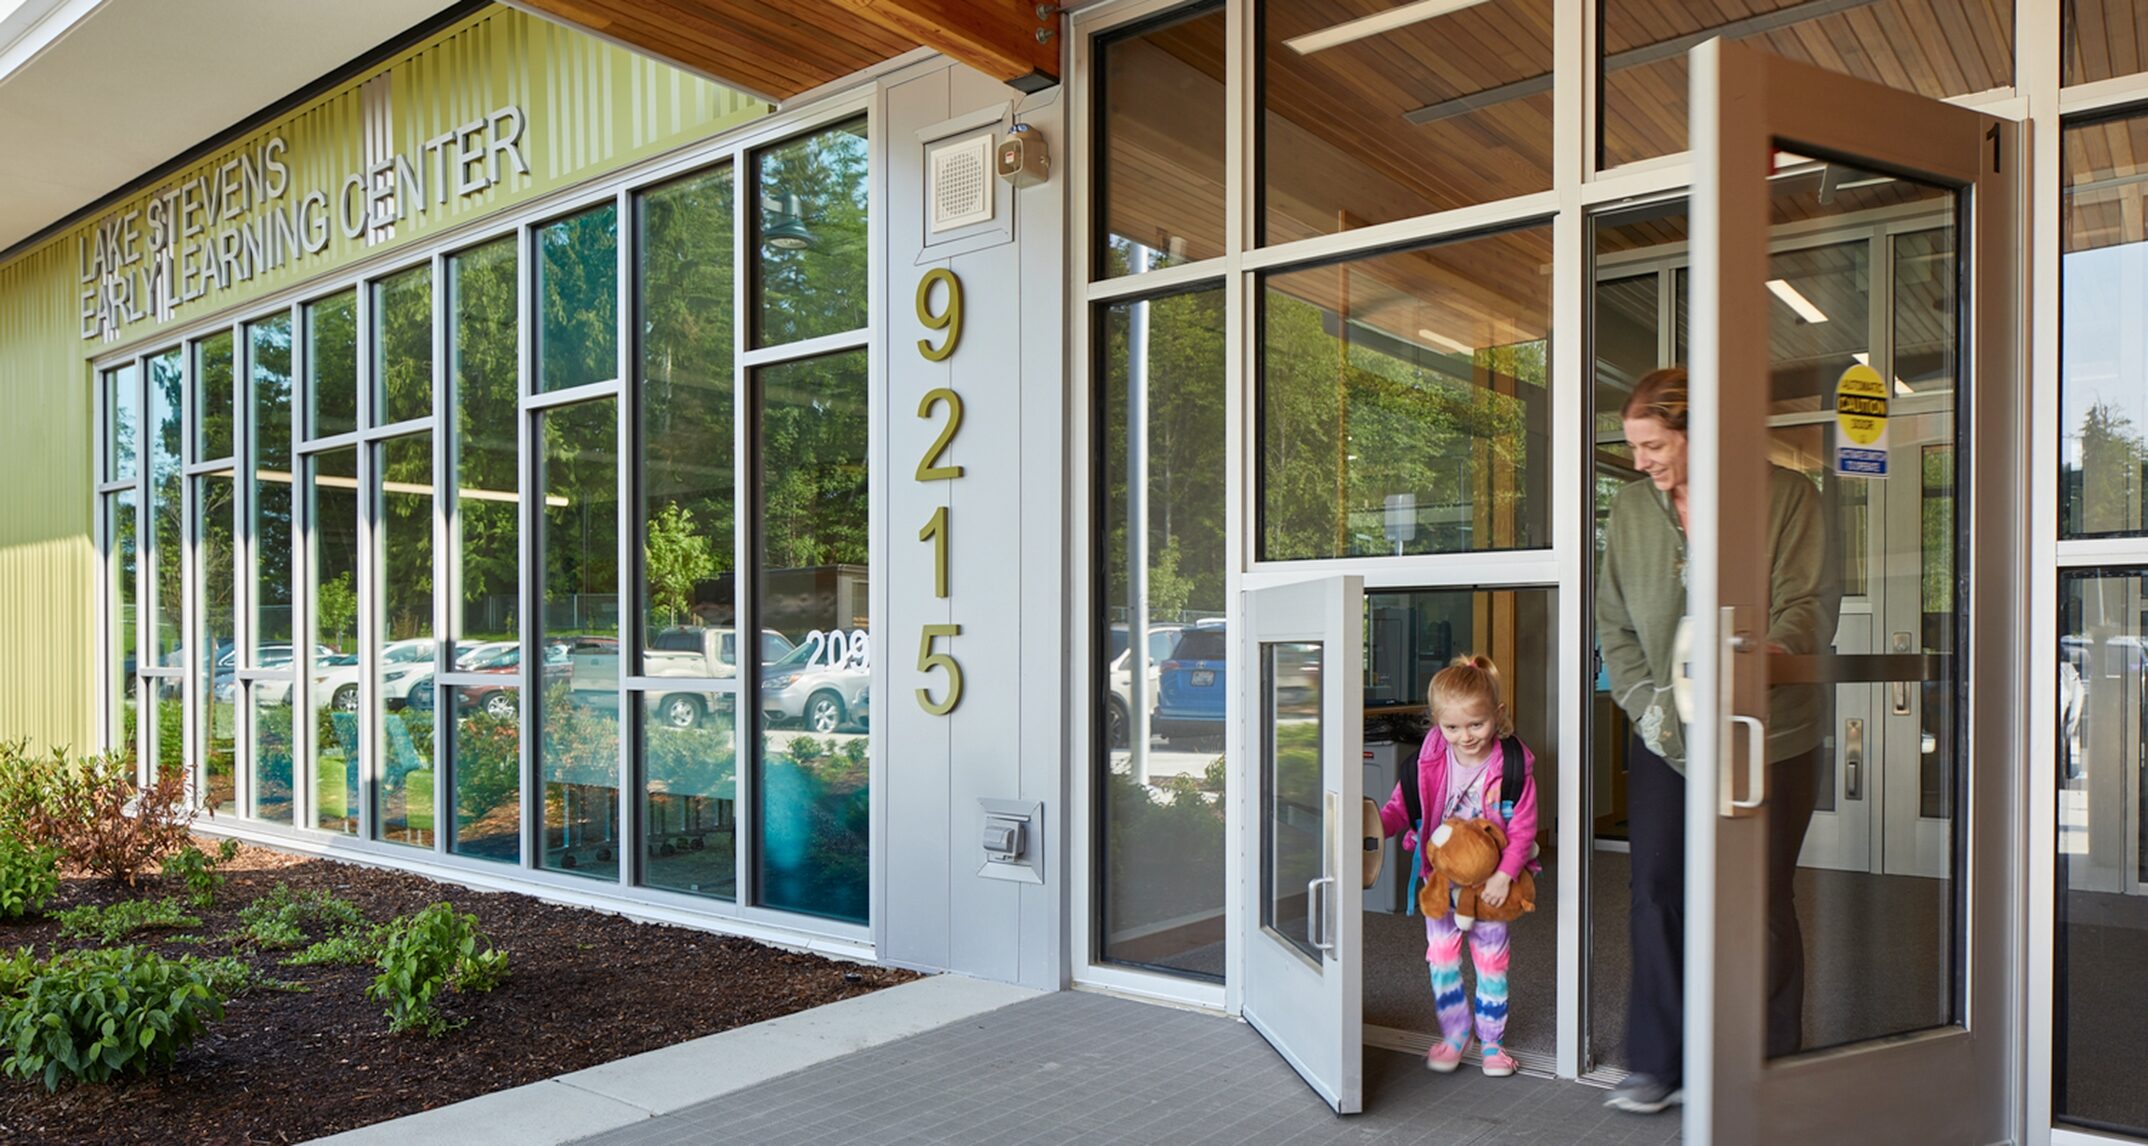 Creating facilities specifically designed for children give students a sense of ownership and excitement, knowing the building has been created just for them. – Lake Stevens Early Learning Center